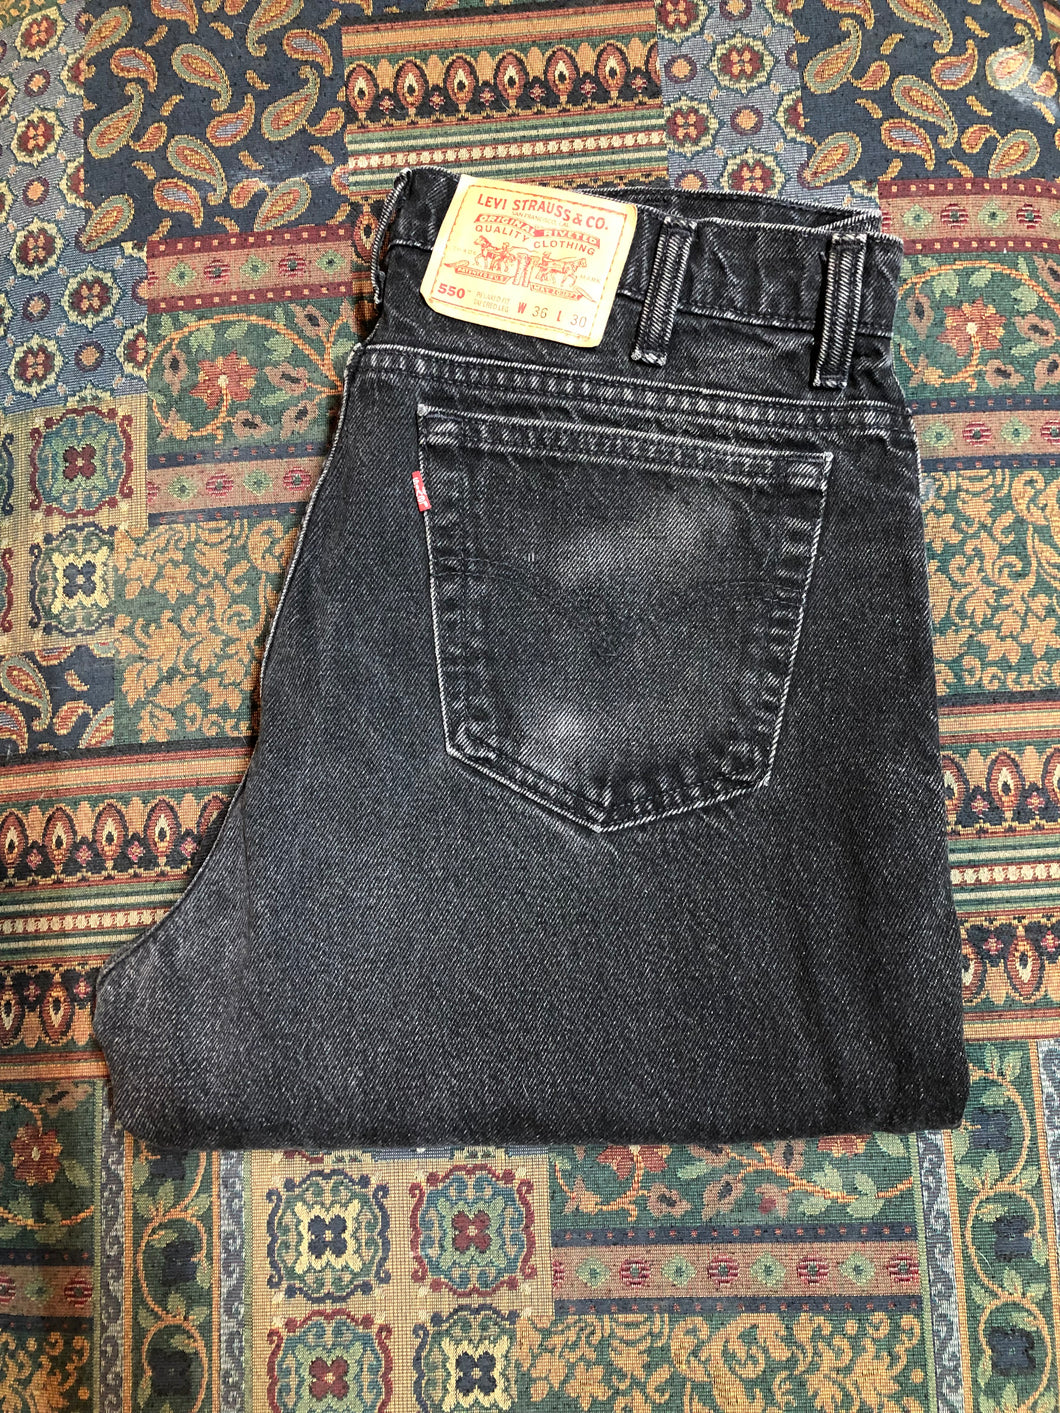 Levi’s 550 - 36”x28” Black Denim Jeans  Vintage Red Tab  High rise  Button fly  Tapered leg  Tagged 36”x30”  100% Cotton  Button stamped “217”  Made in Canada - Kingspier Vintage